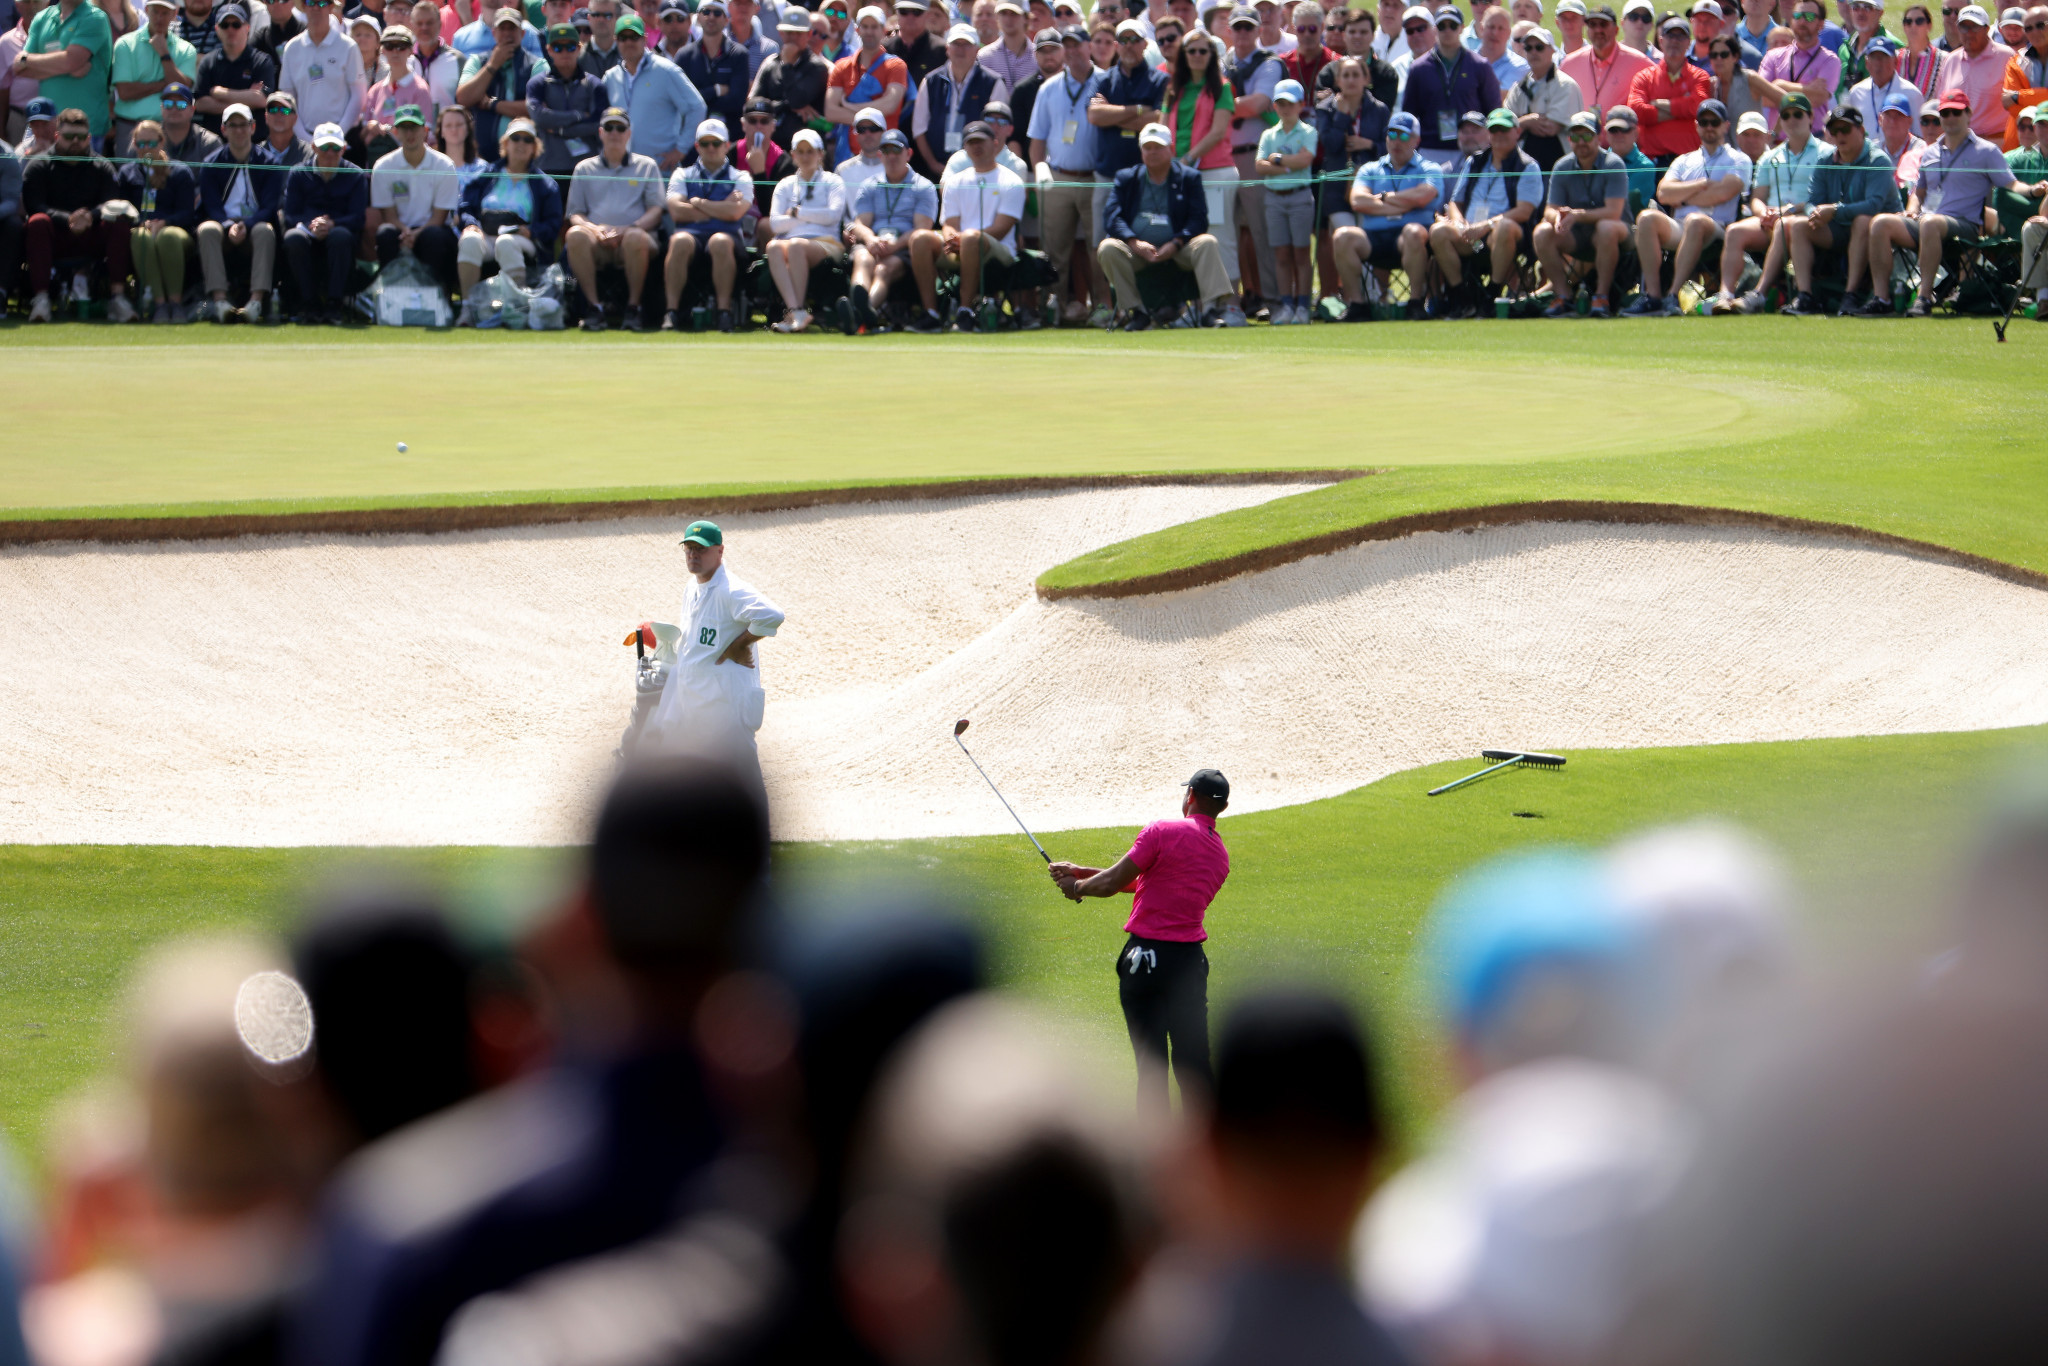 Tiger Woods was the star attraction at Augusta National Gold Club ©Getty Images